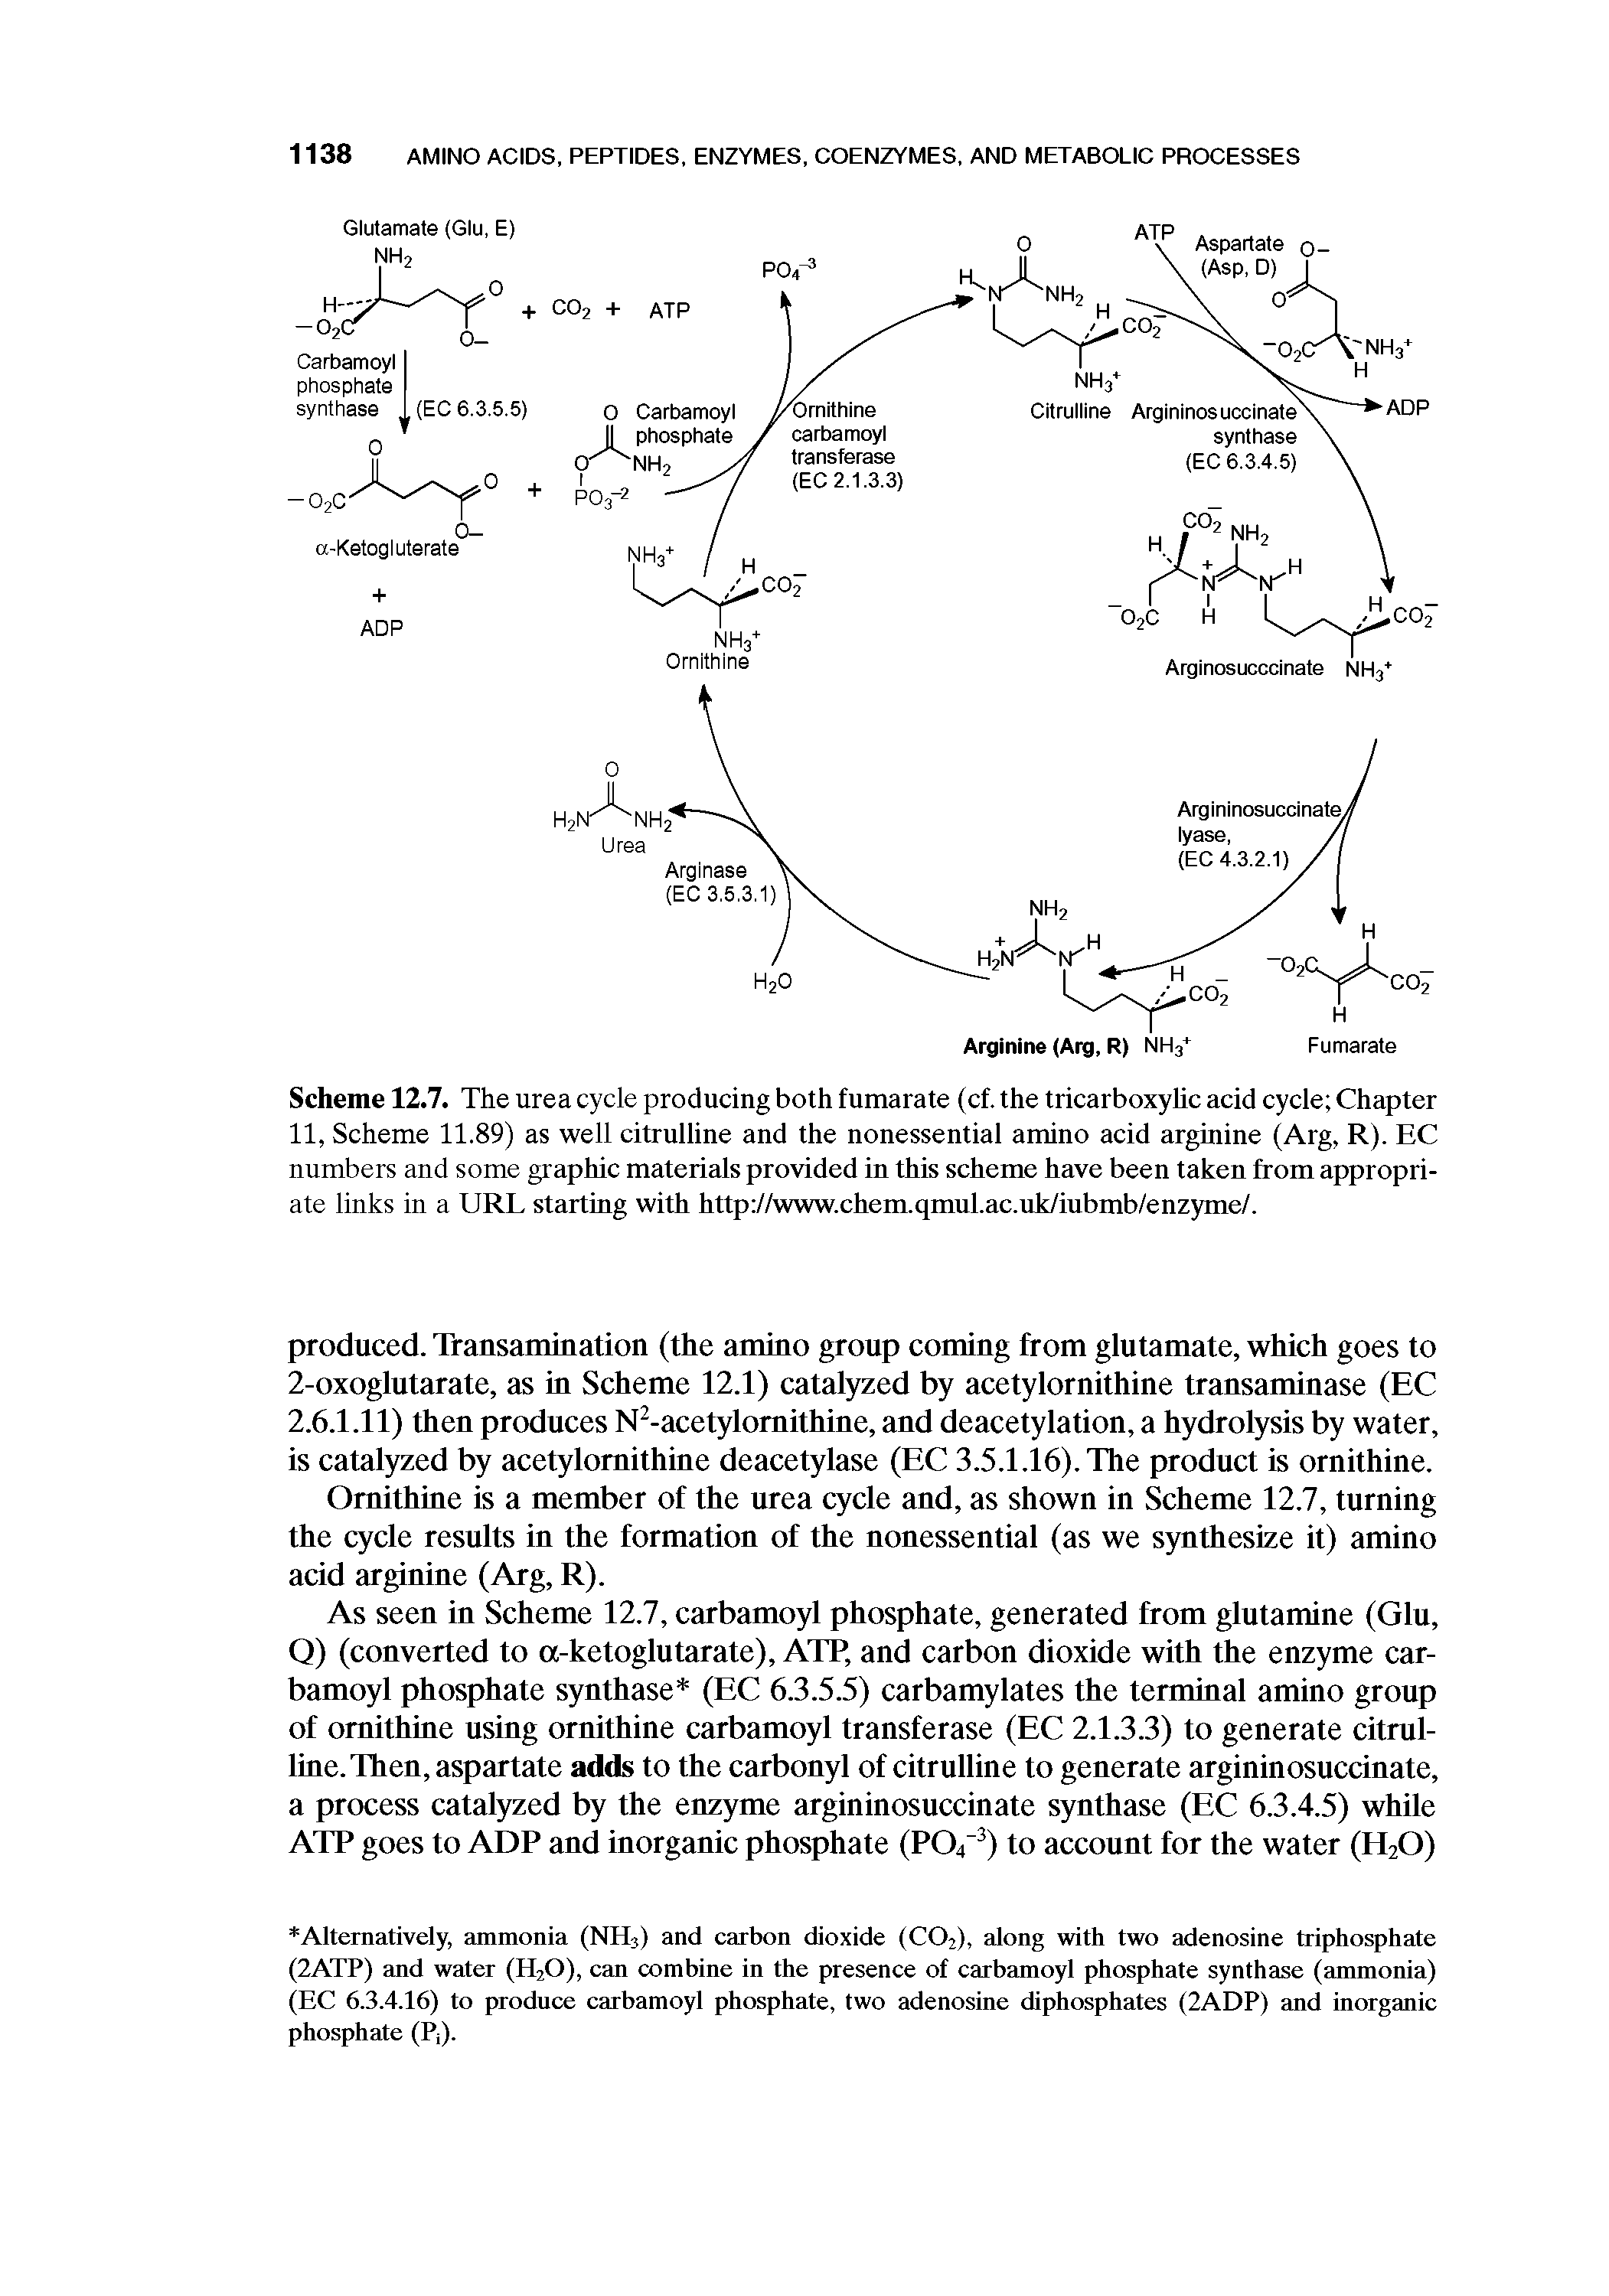 Scheme 12.7. The urea cycle producing both fumarate (cf. the tricarboxylic acid cycle Chapter 11, Scheme 11,89) as well citrulline and the nonessential amino acid arginine (Arg, R). EC numbers and some graphic materials provided in this scheme have been taken from appropriate links in a URL starting with http //www.chem.qmul.ac.uk/iubmb/enzyme/.